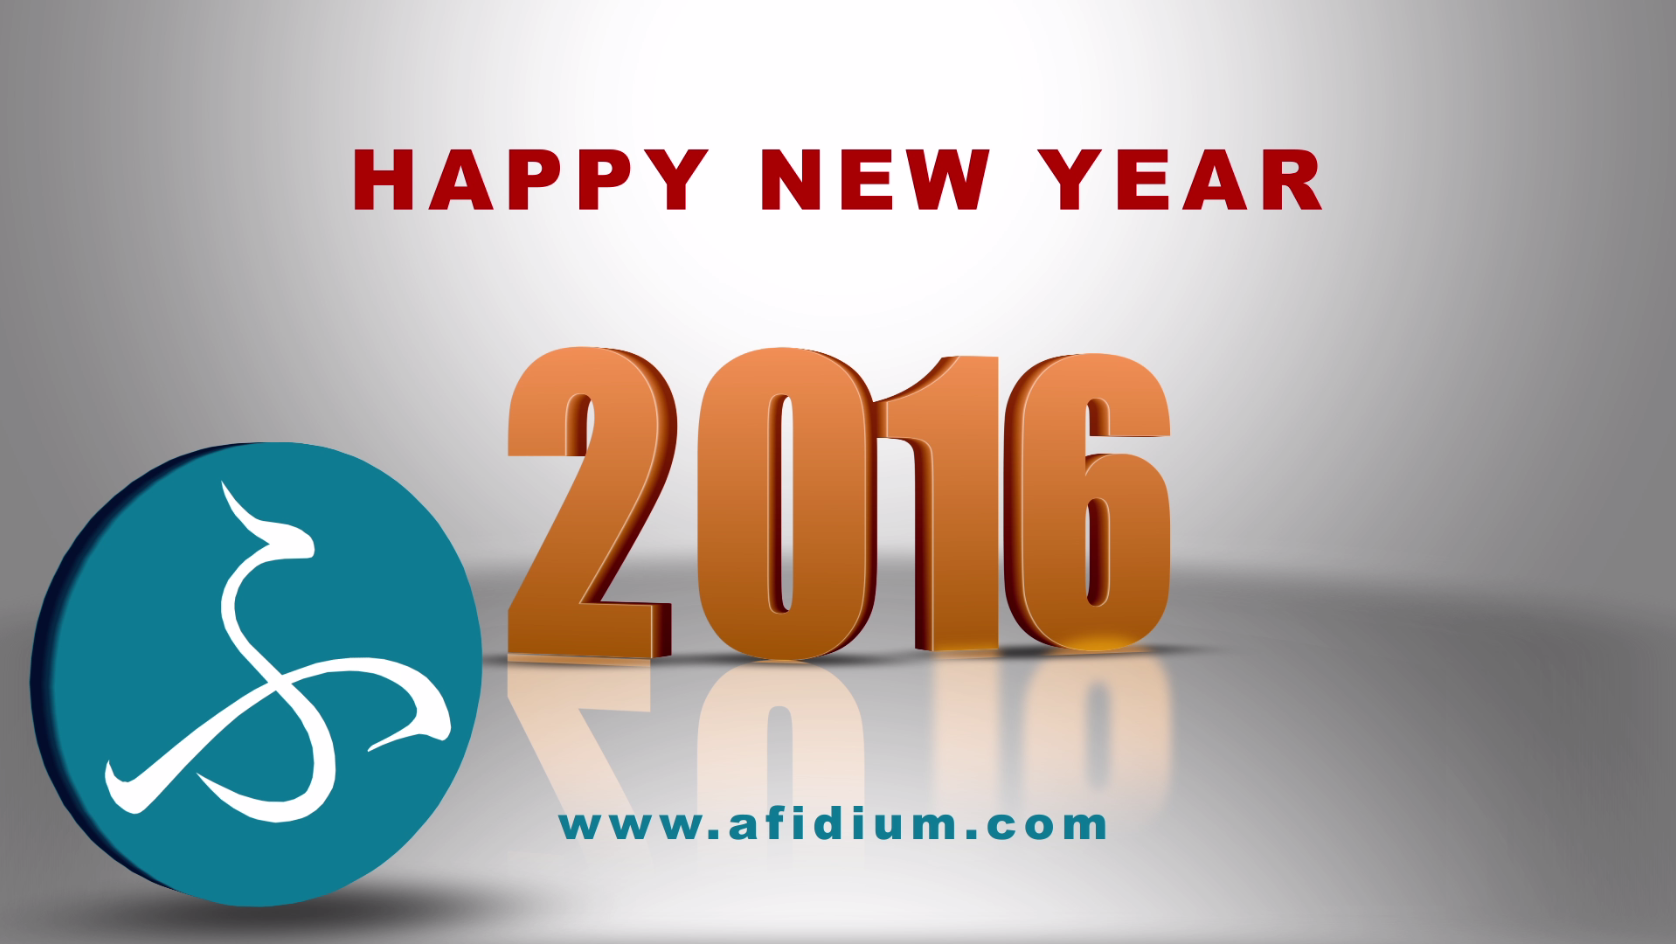 Afidium wishes you a happy new year!